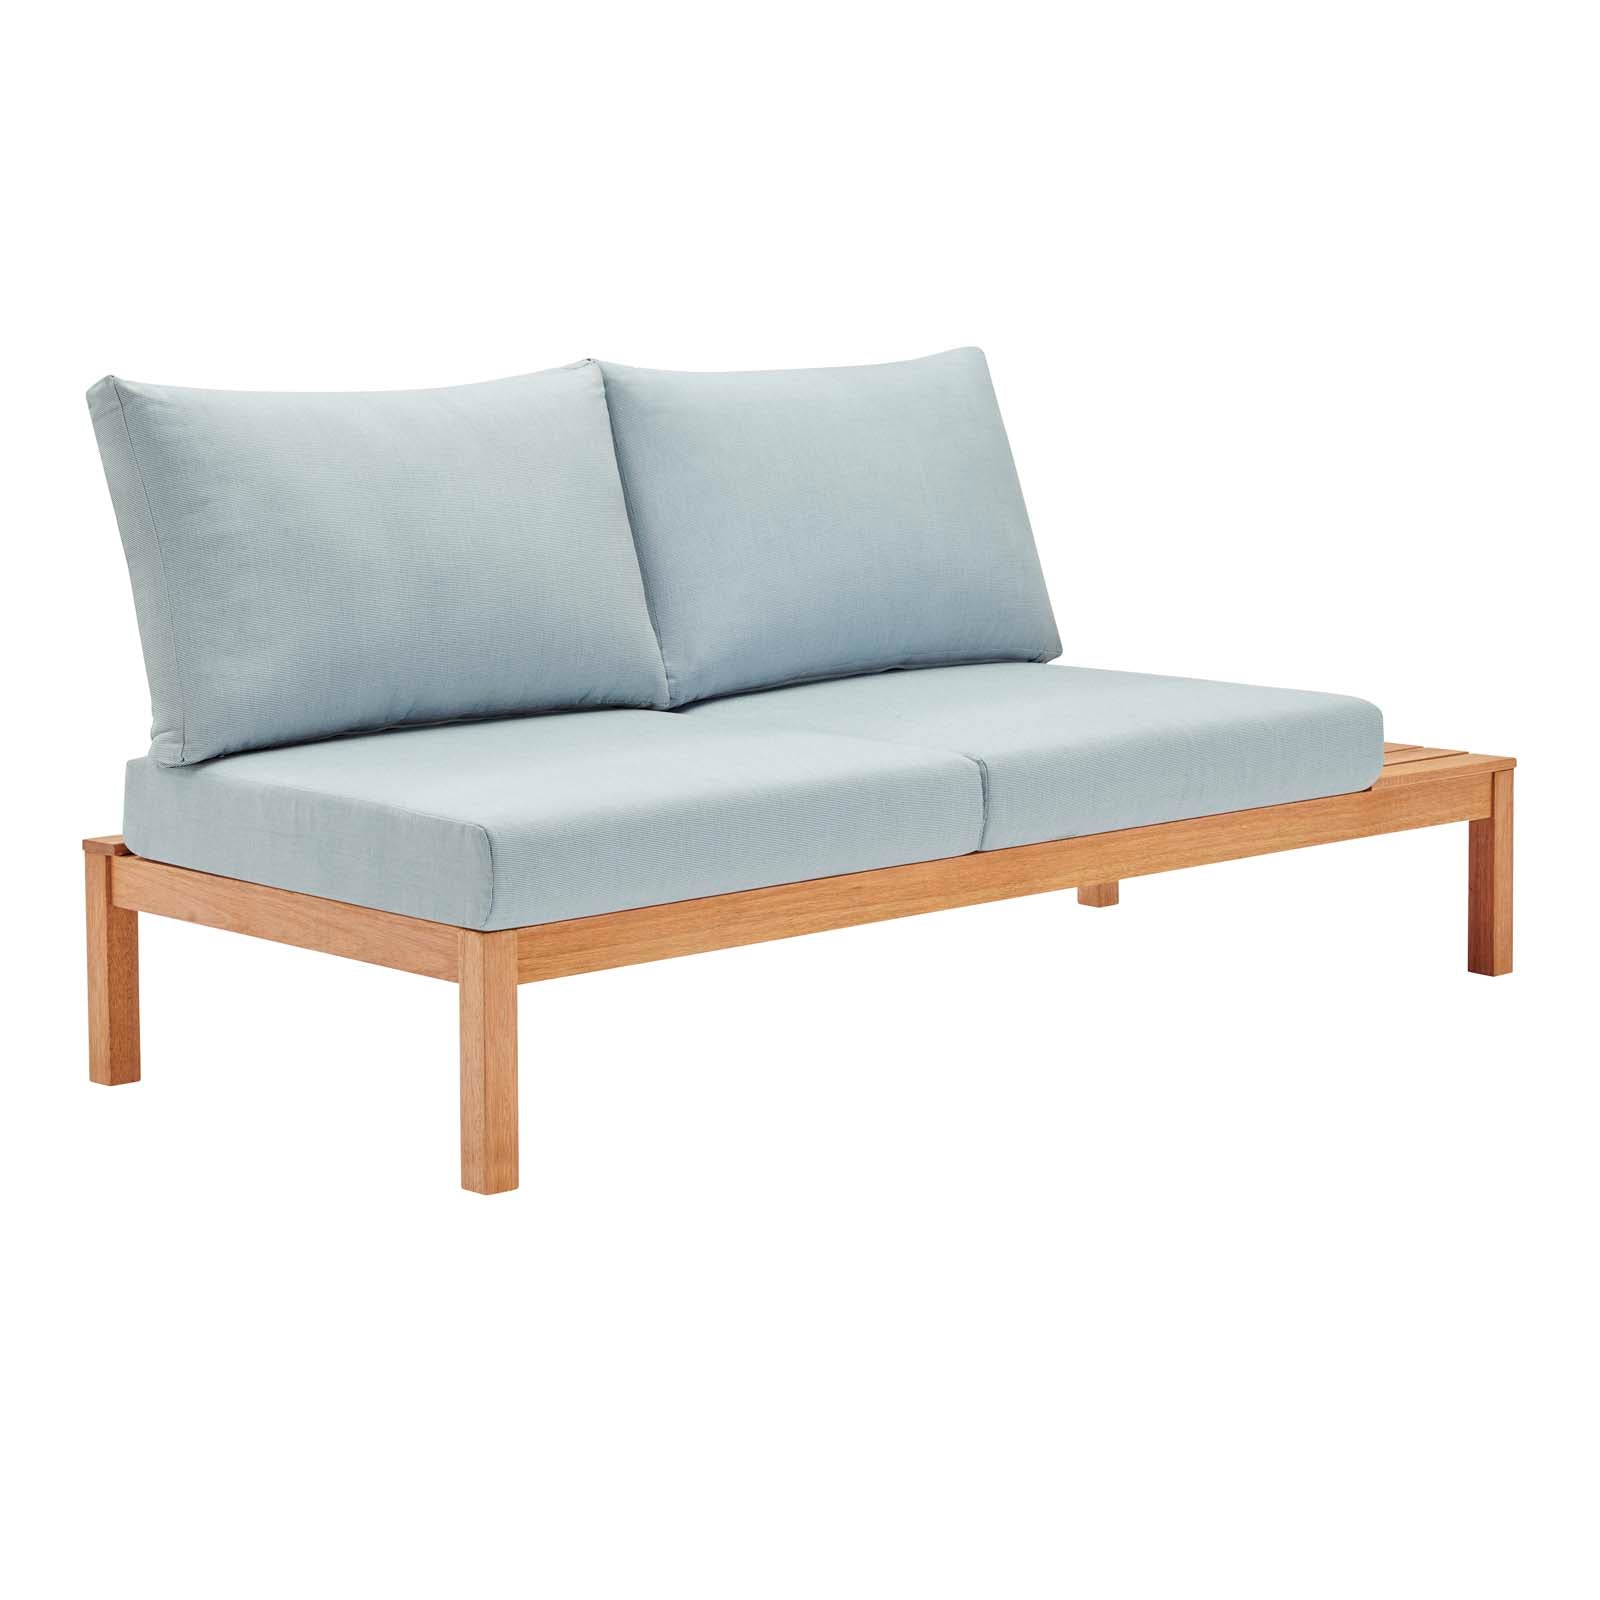 Modway Outdoor Sofas - Freeport Karri Outdoor Patio Loveseat with End Table Natural Light Blue